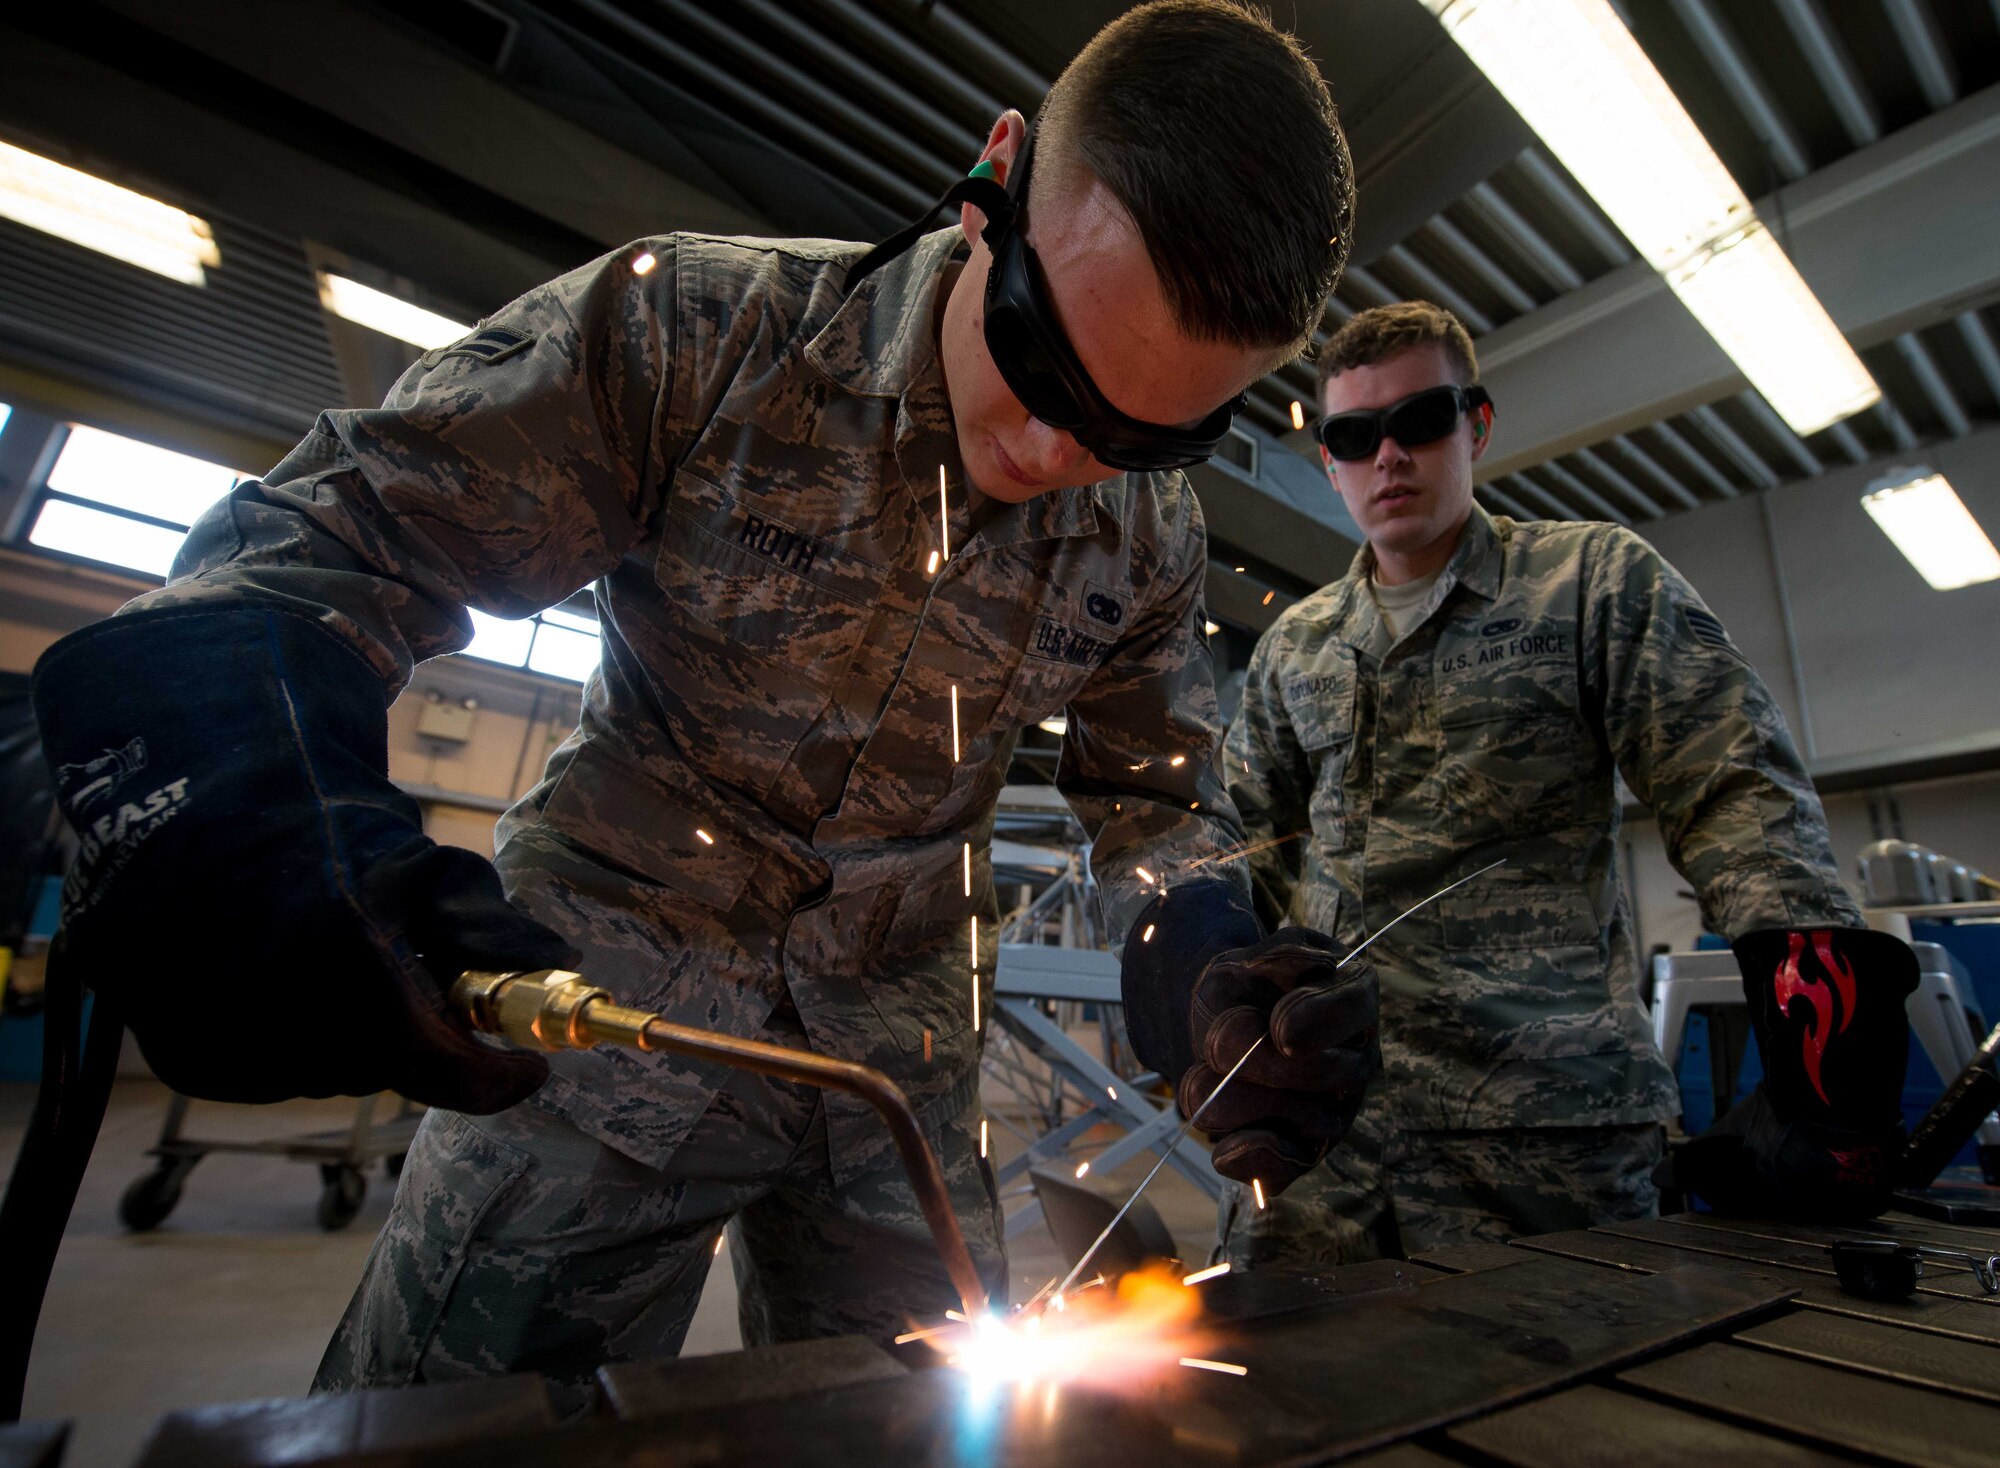 Staff Sgt. Brandon Didonato, 86th Maintenance Squadron aircraft metals technology technician, uses oxyacetylene welding while Airman 1st Class Joshua Roth, 86th MXS aircraft metals technology technician, observes on Ramstein Air Base, Germany, May 2, 2017. The 86th MXS Aircraft Metals Technology shop supports the flight line by creating tools and aircraft parts, including those that may otherwise be difficult or impossible to obtain through purchases because they are too far away or out of production. (U.S. Air Force photo by Senior Airman Elizabeth Baker/Released)